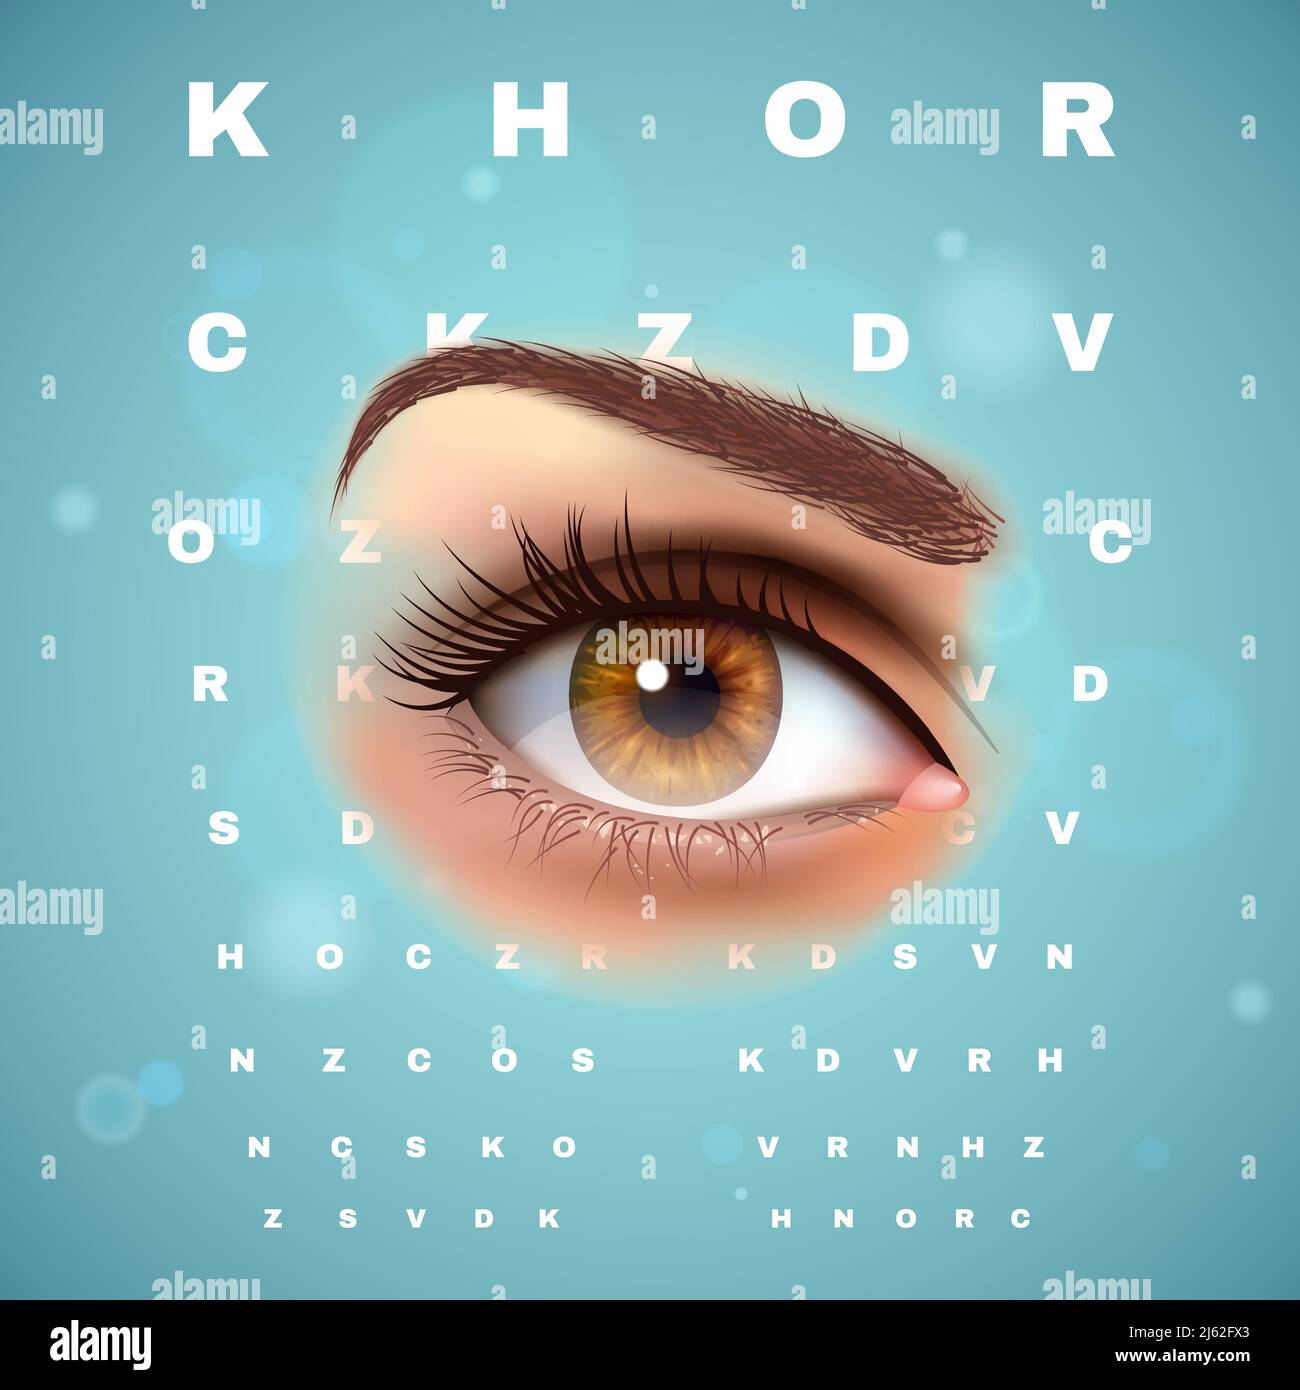 https://c8.alamy.com/comp/2J62FX3/ophthalmic-clinic-optometrist-visual-acuity-control-chart-with-beautiful-realistic-young-woman-eye-advertisement-composition-poster-vector-illustratio-2J62FX3.jpg